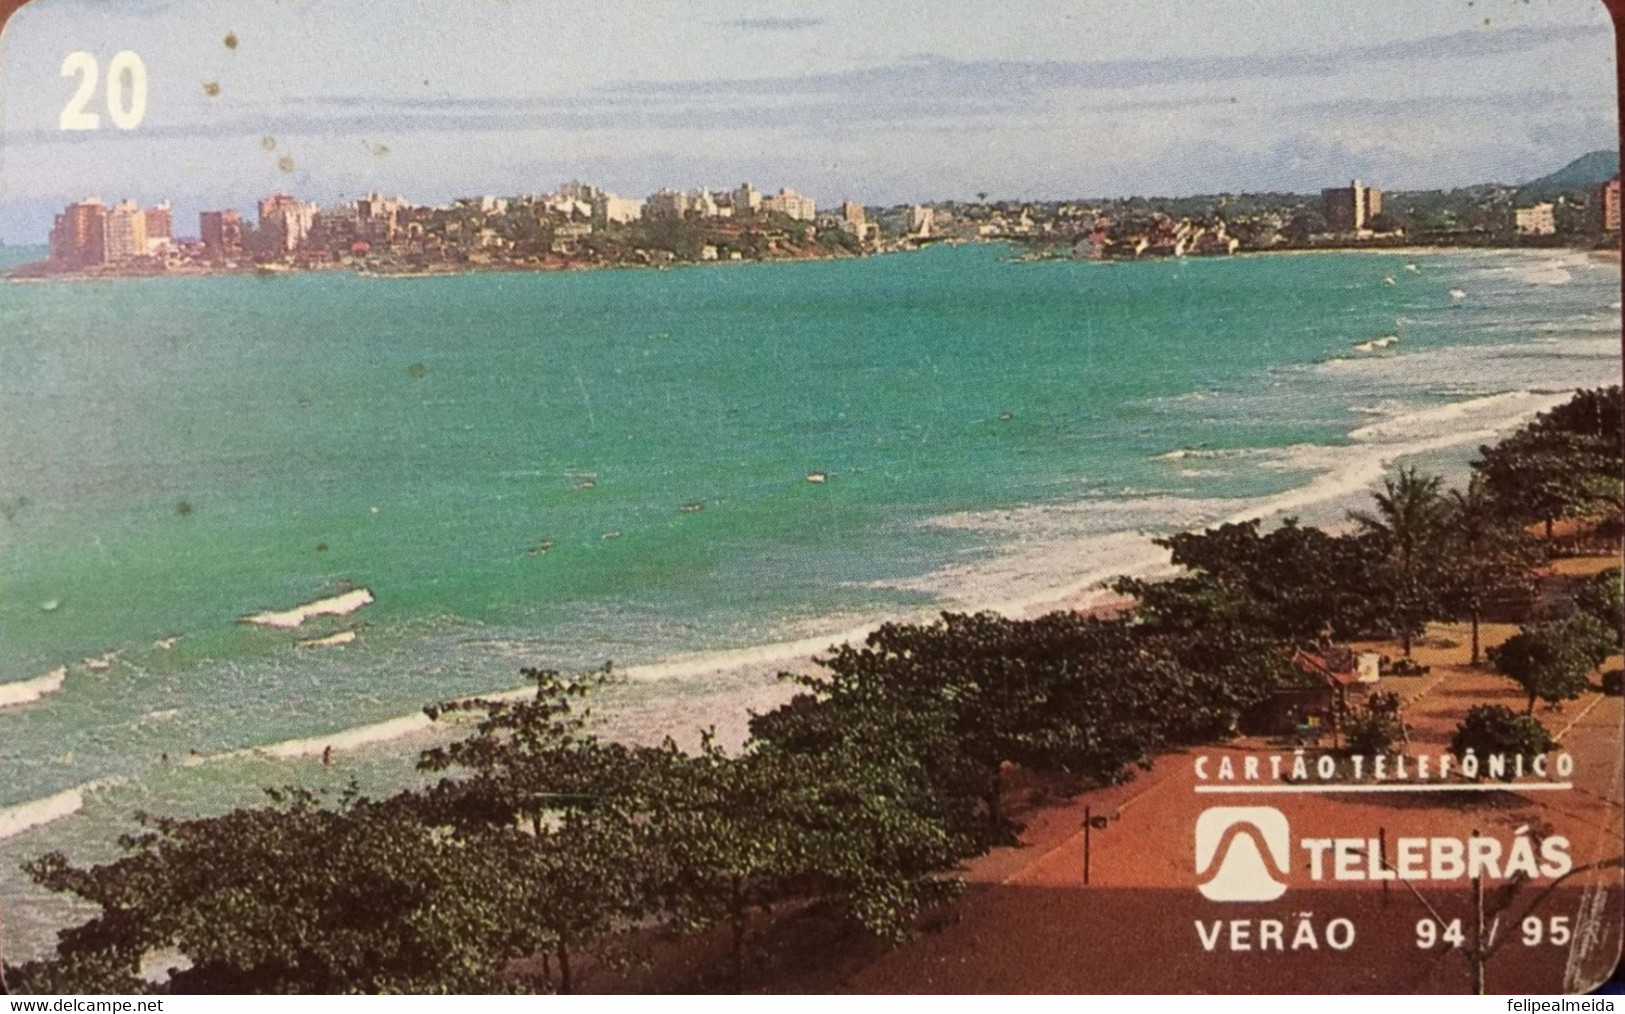 Rare 26 Years Old Phone Card Manufactured By Telebras In 1995 - Series Summer 1994 - 1995 Photo Praia Do Morro - Guarapa - Cultural